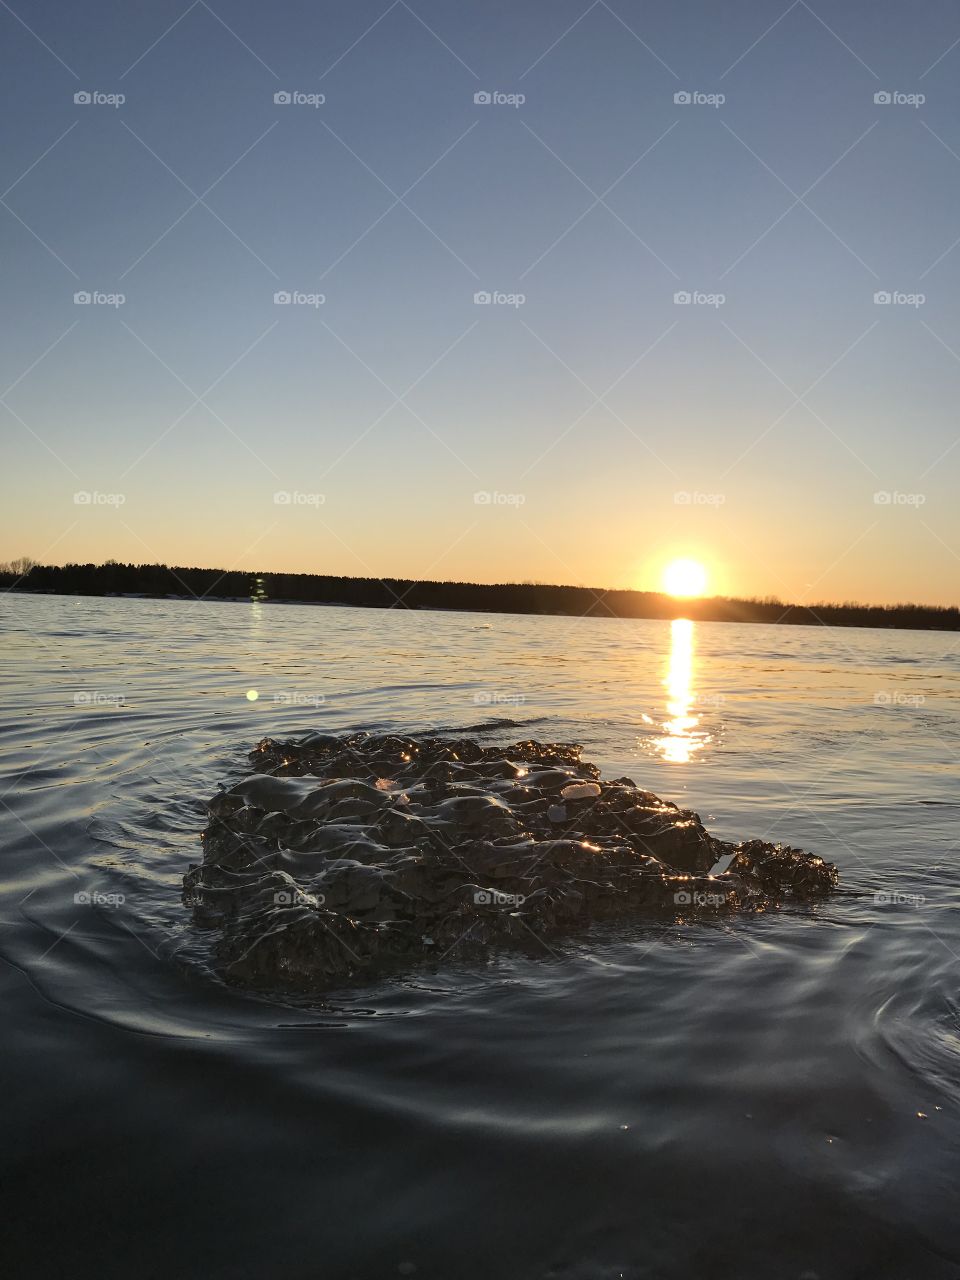 Floe on the background of the sunset.  Sunset on the river in the spring.